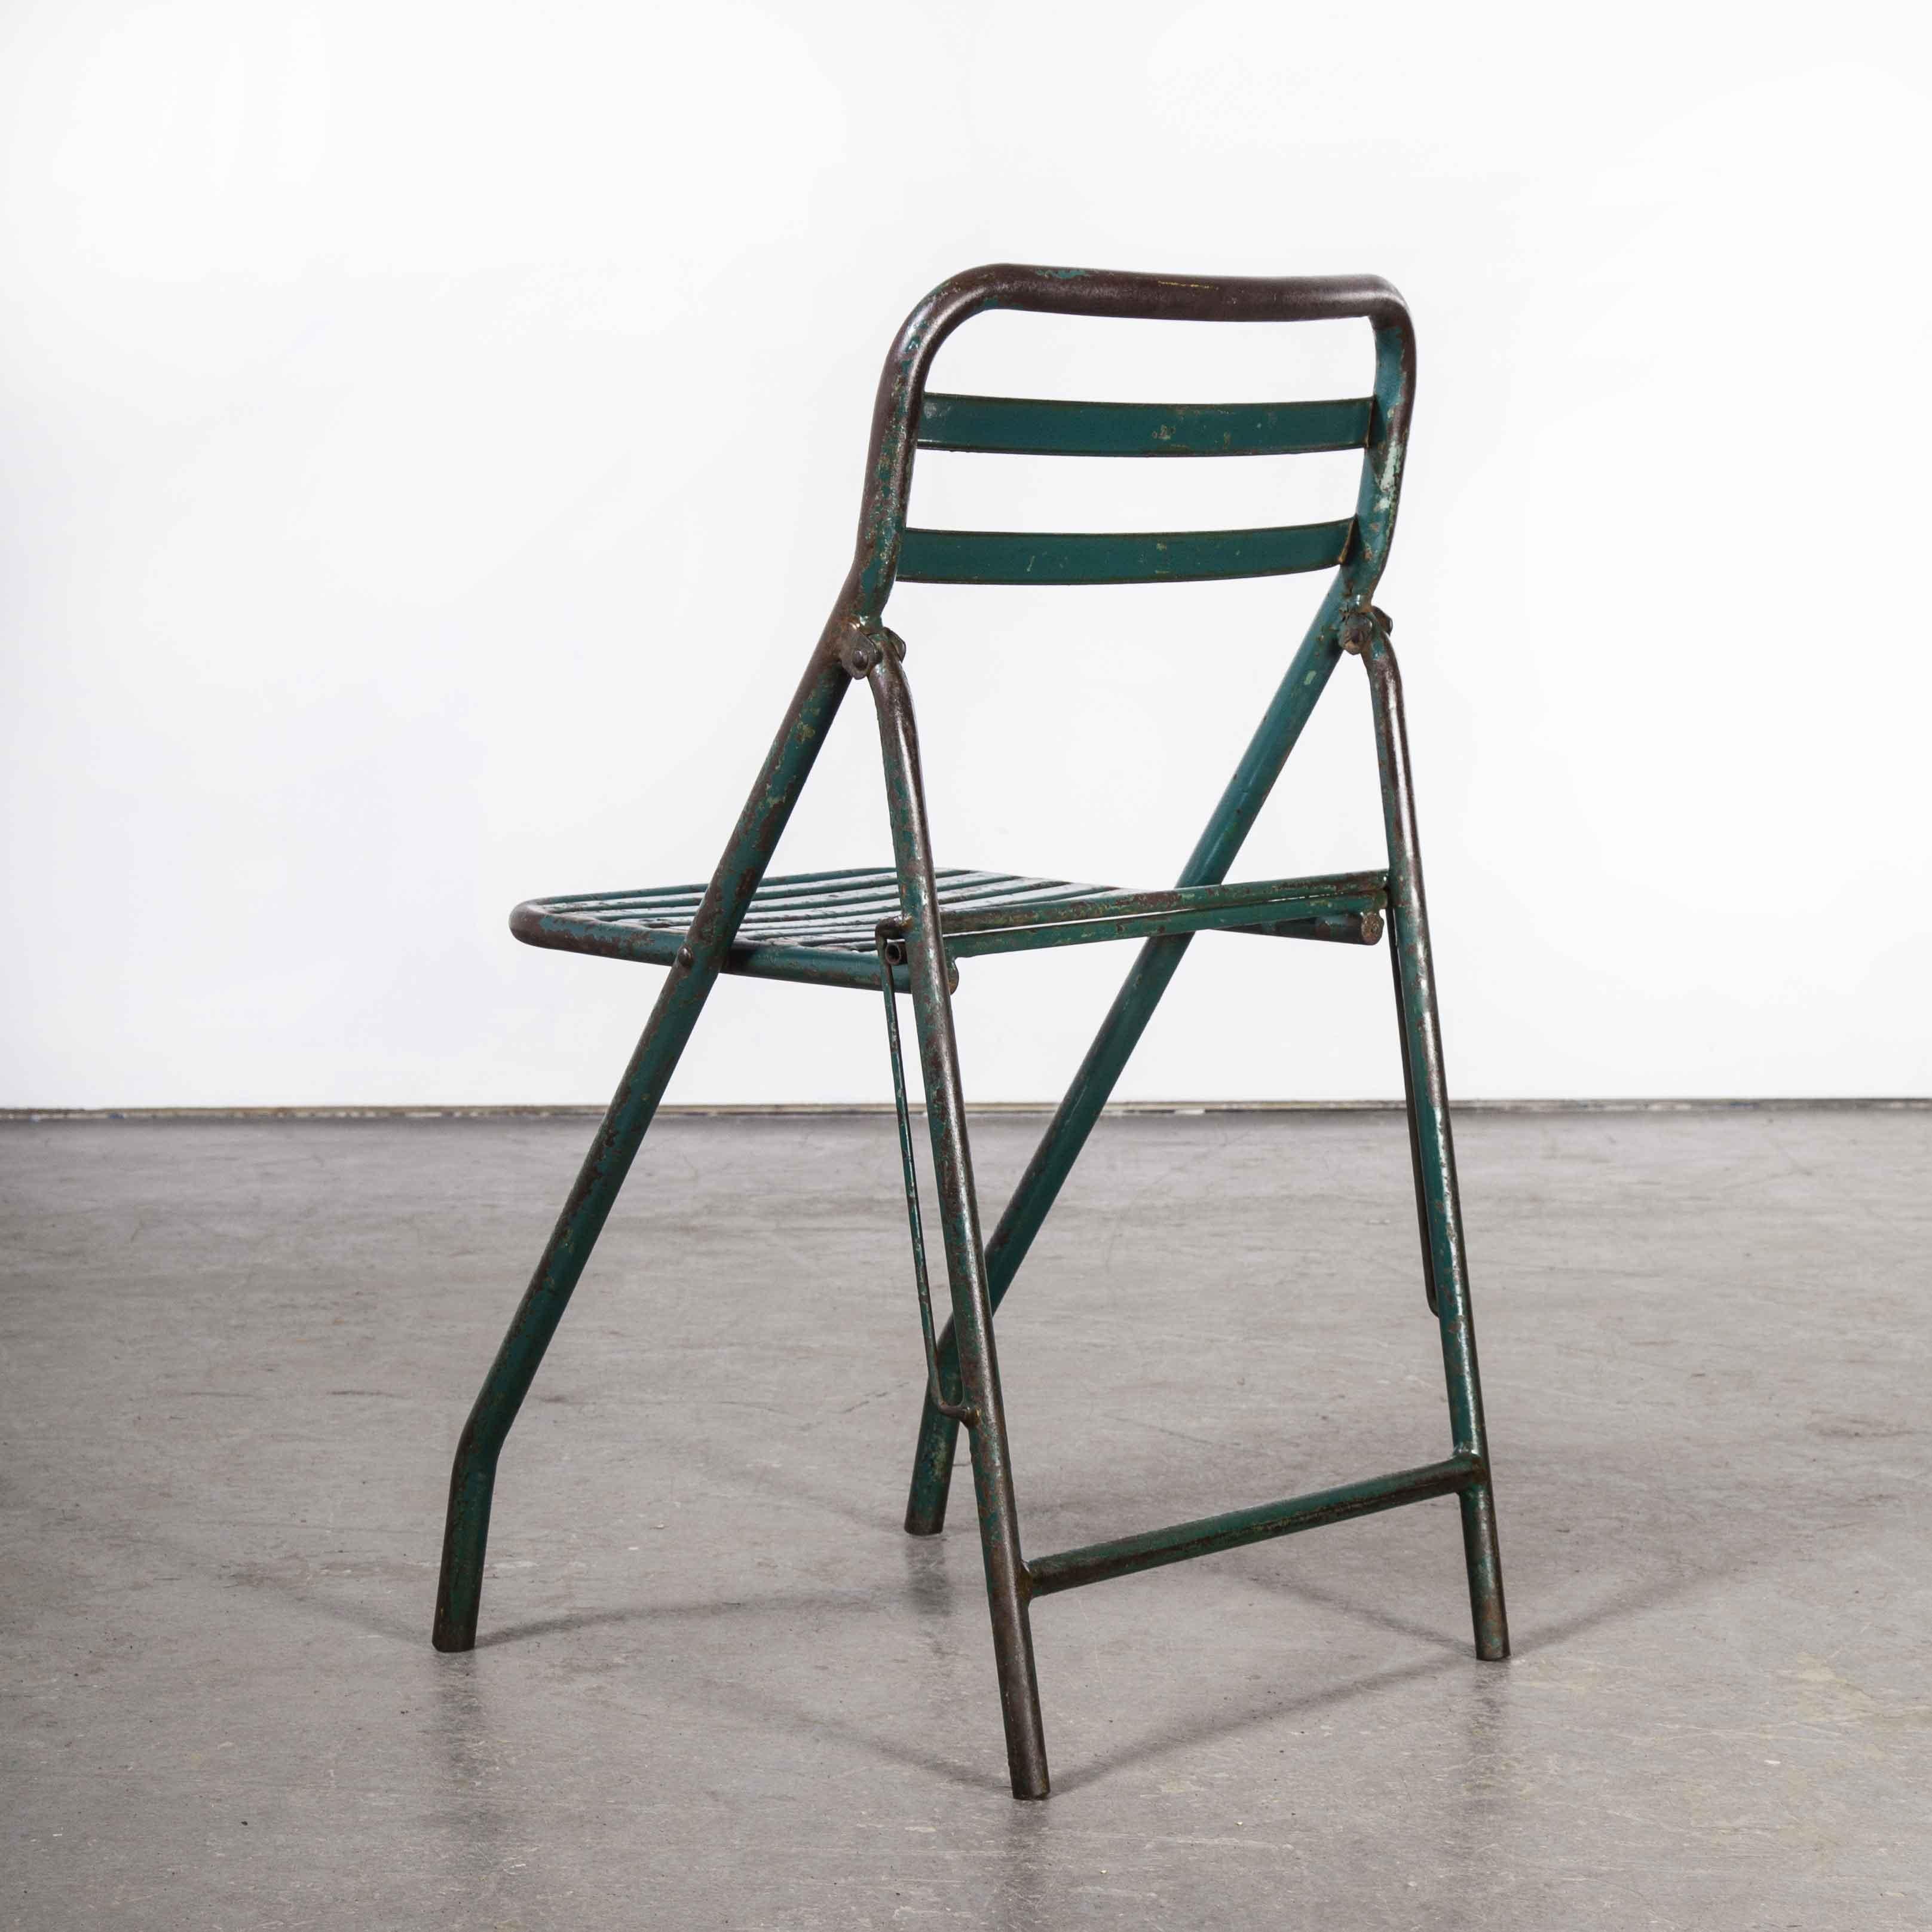 1960's, French Army Green Metal Folding Chairs, Various Quantities Available 4